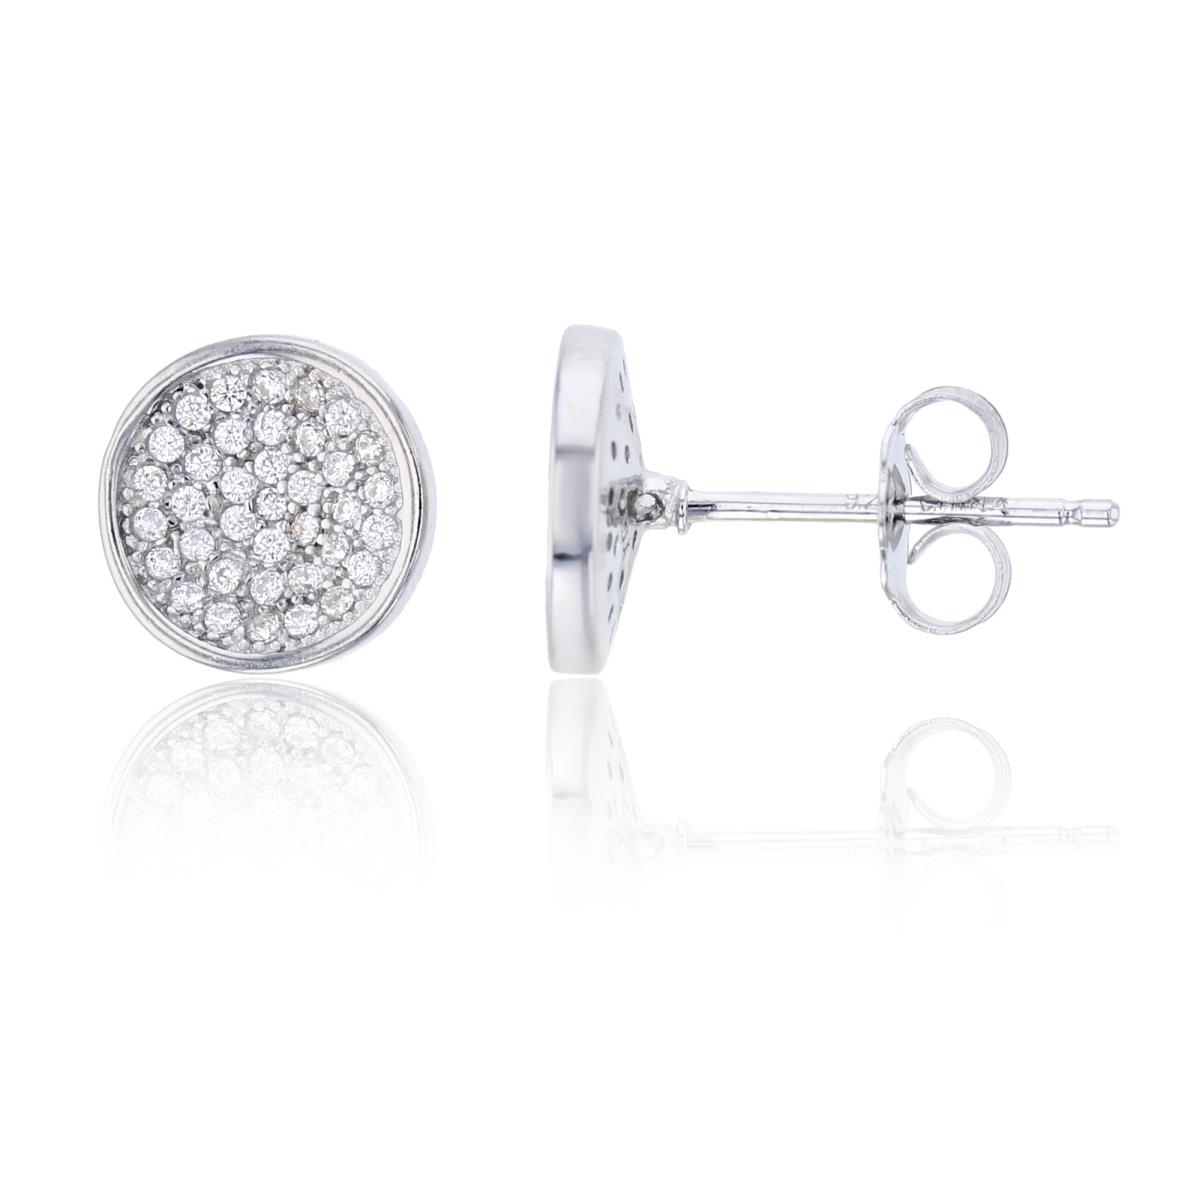 Sterling Siver Rhodium 9.5x9.5mm Micropave Round Disc Stud Earring